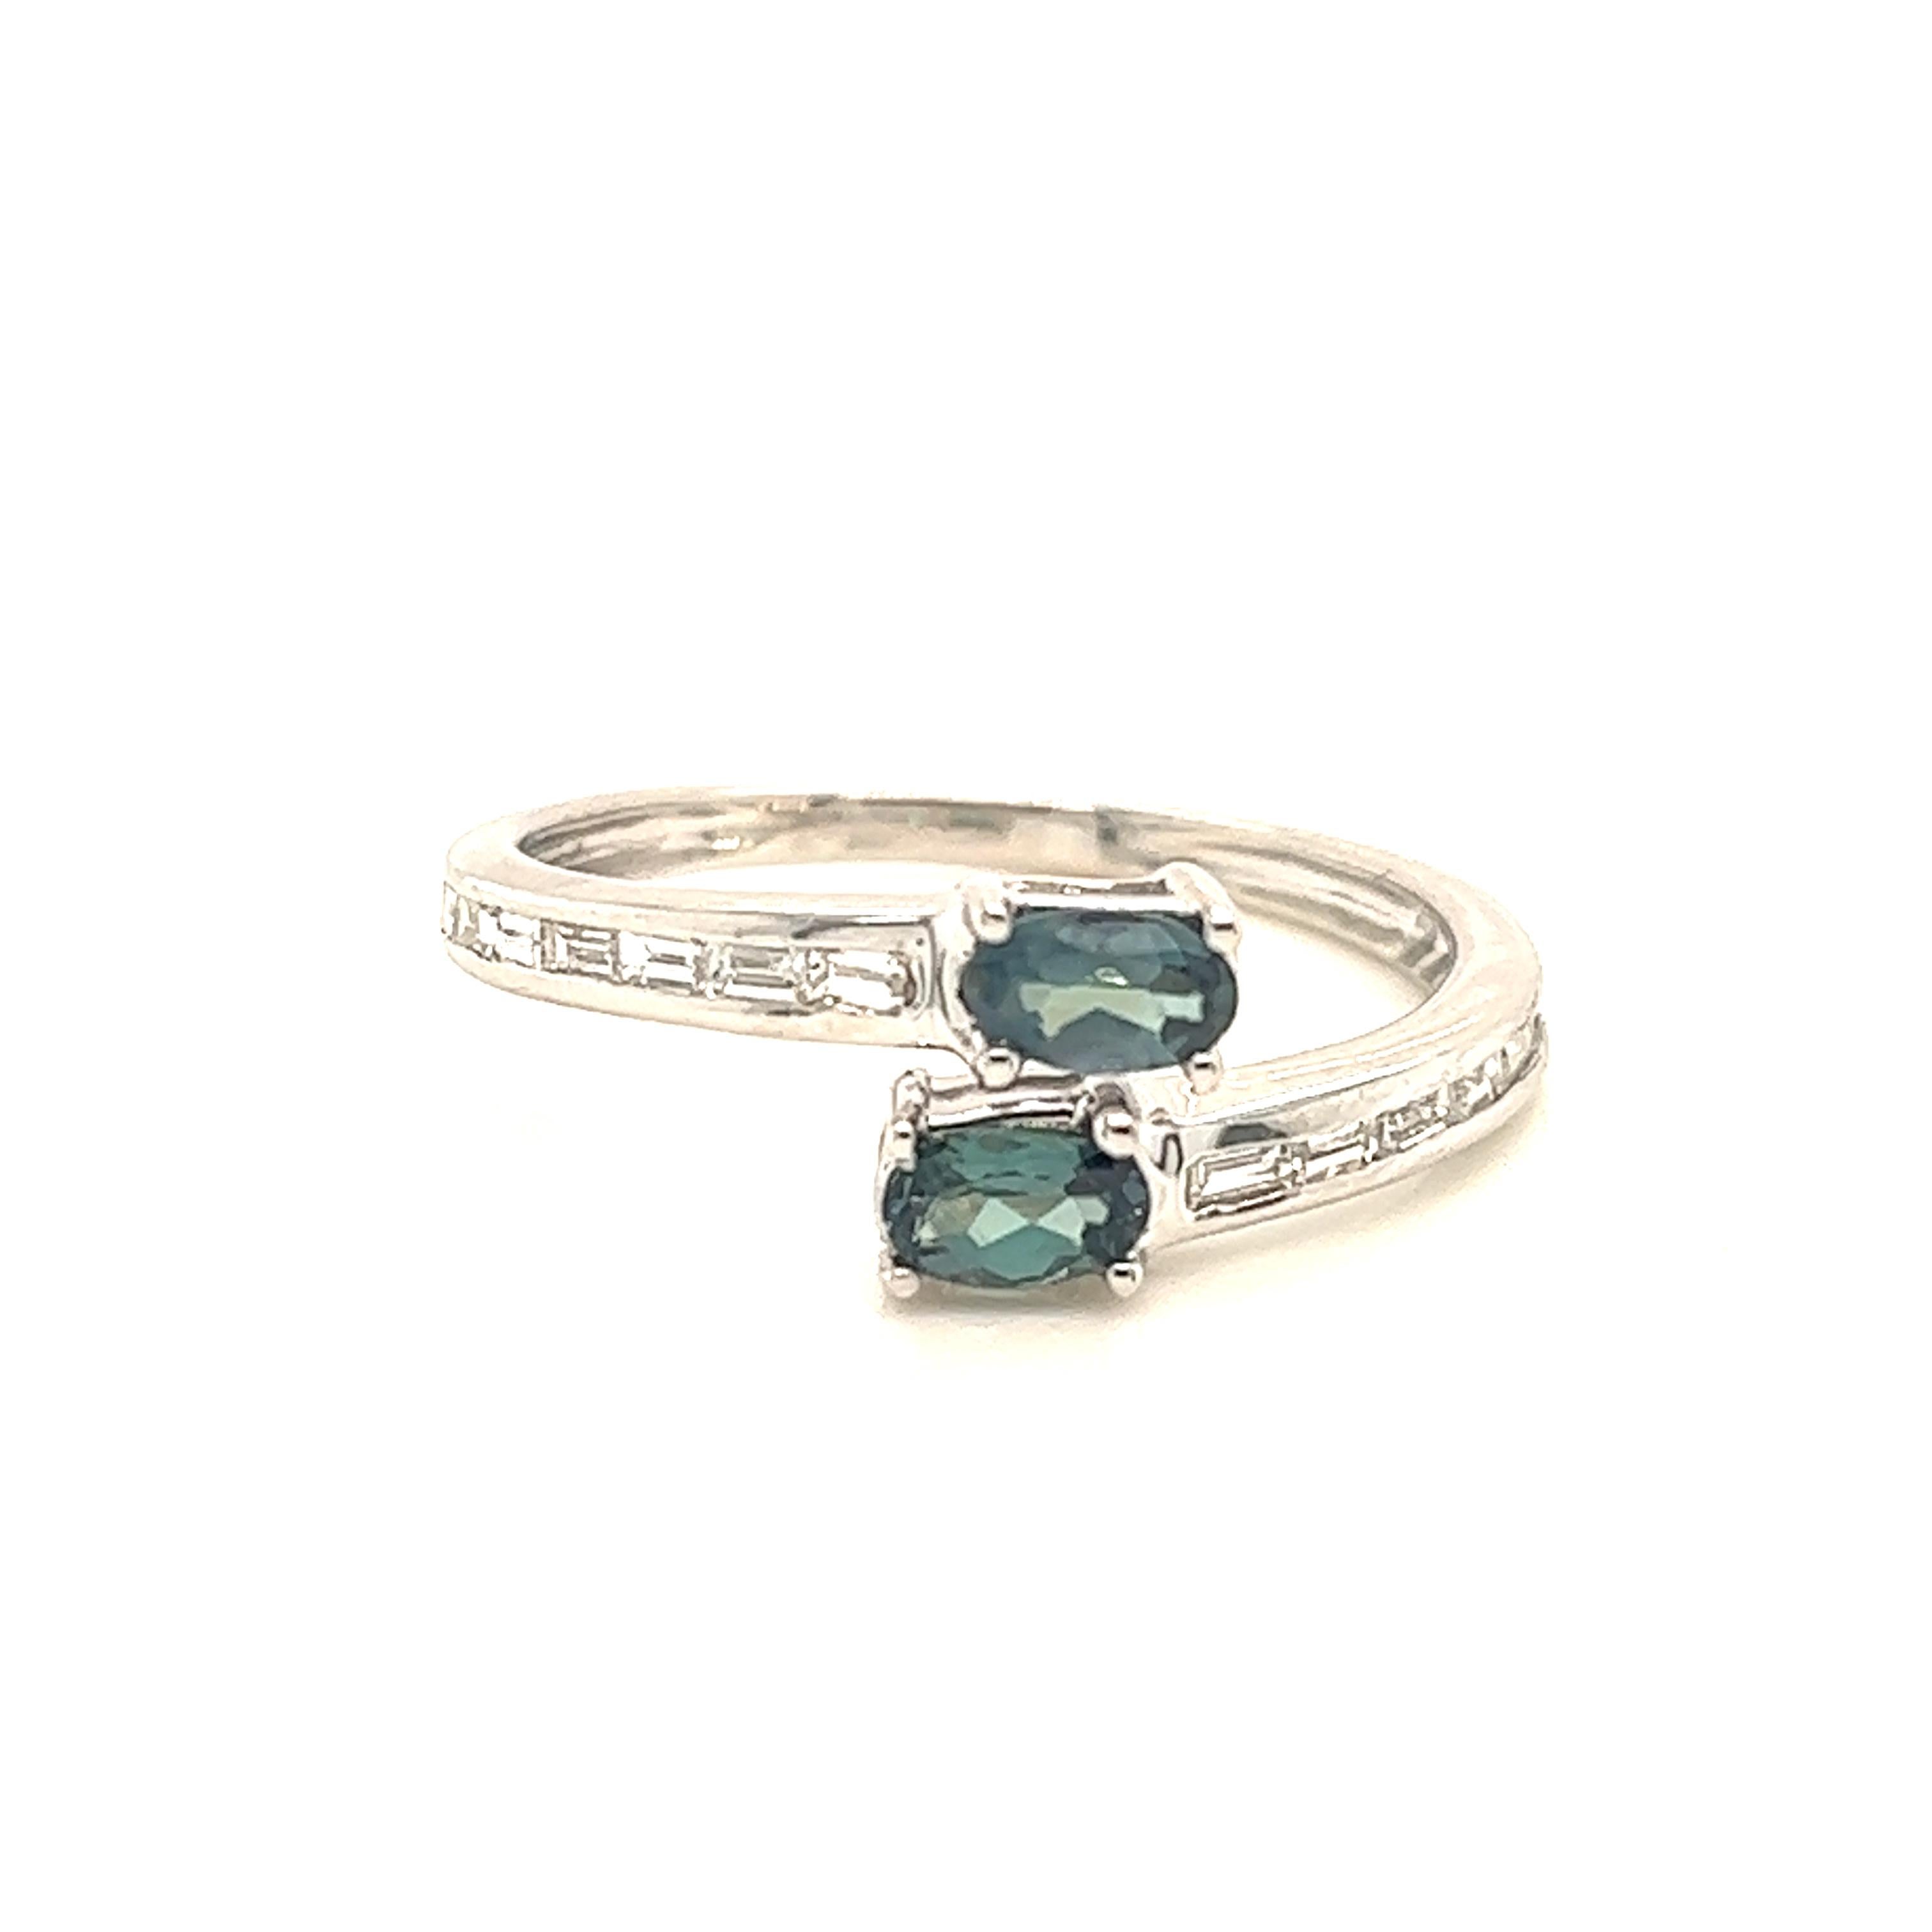 This is a gorgeous natural AAA quality Alexandrite surrounded by dainty diamonds that is set in a vintage White Gold setting. This ring features a natural 0.57 carat oval alexandrite that is surrounded by brilliant white diamonds. The ring is a true